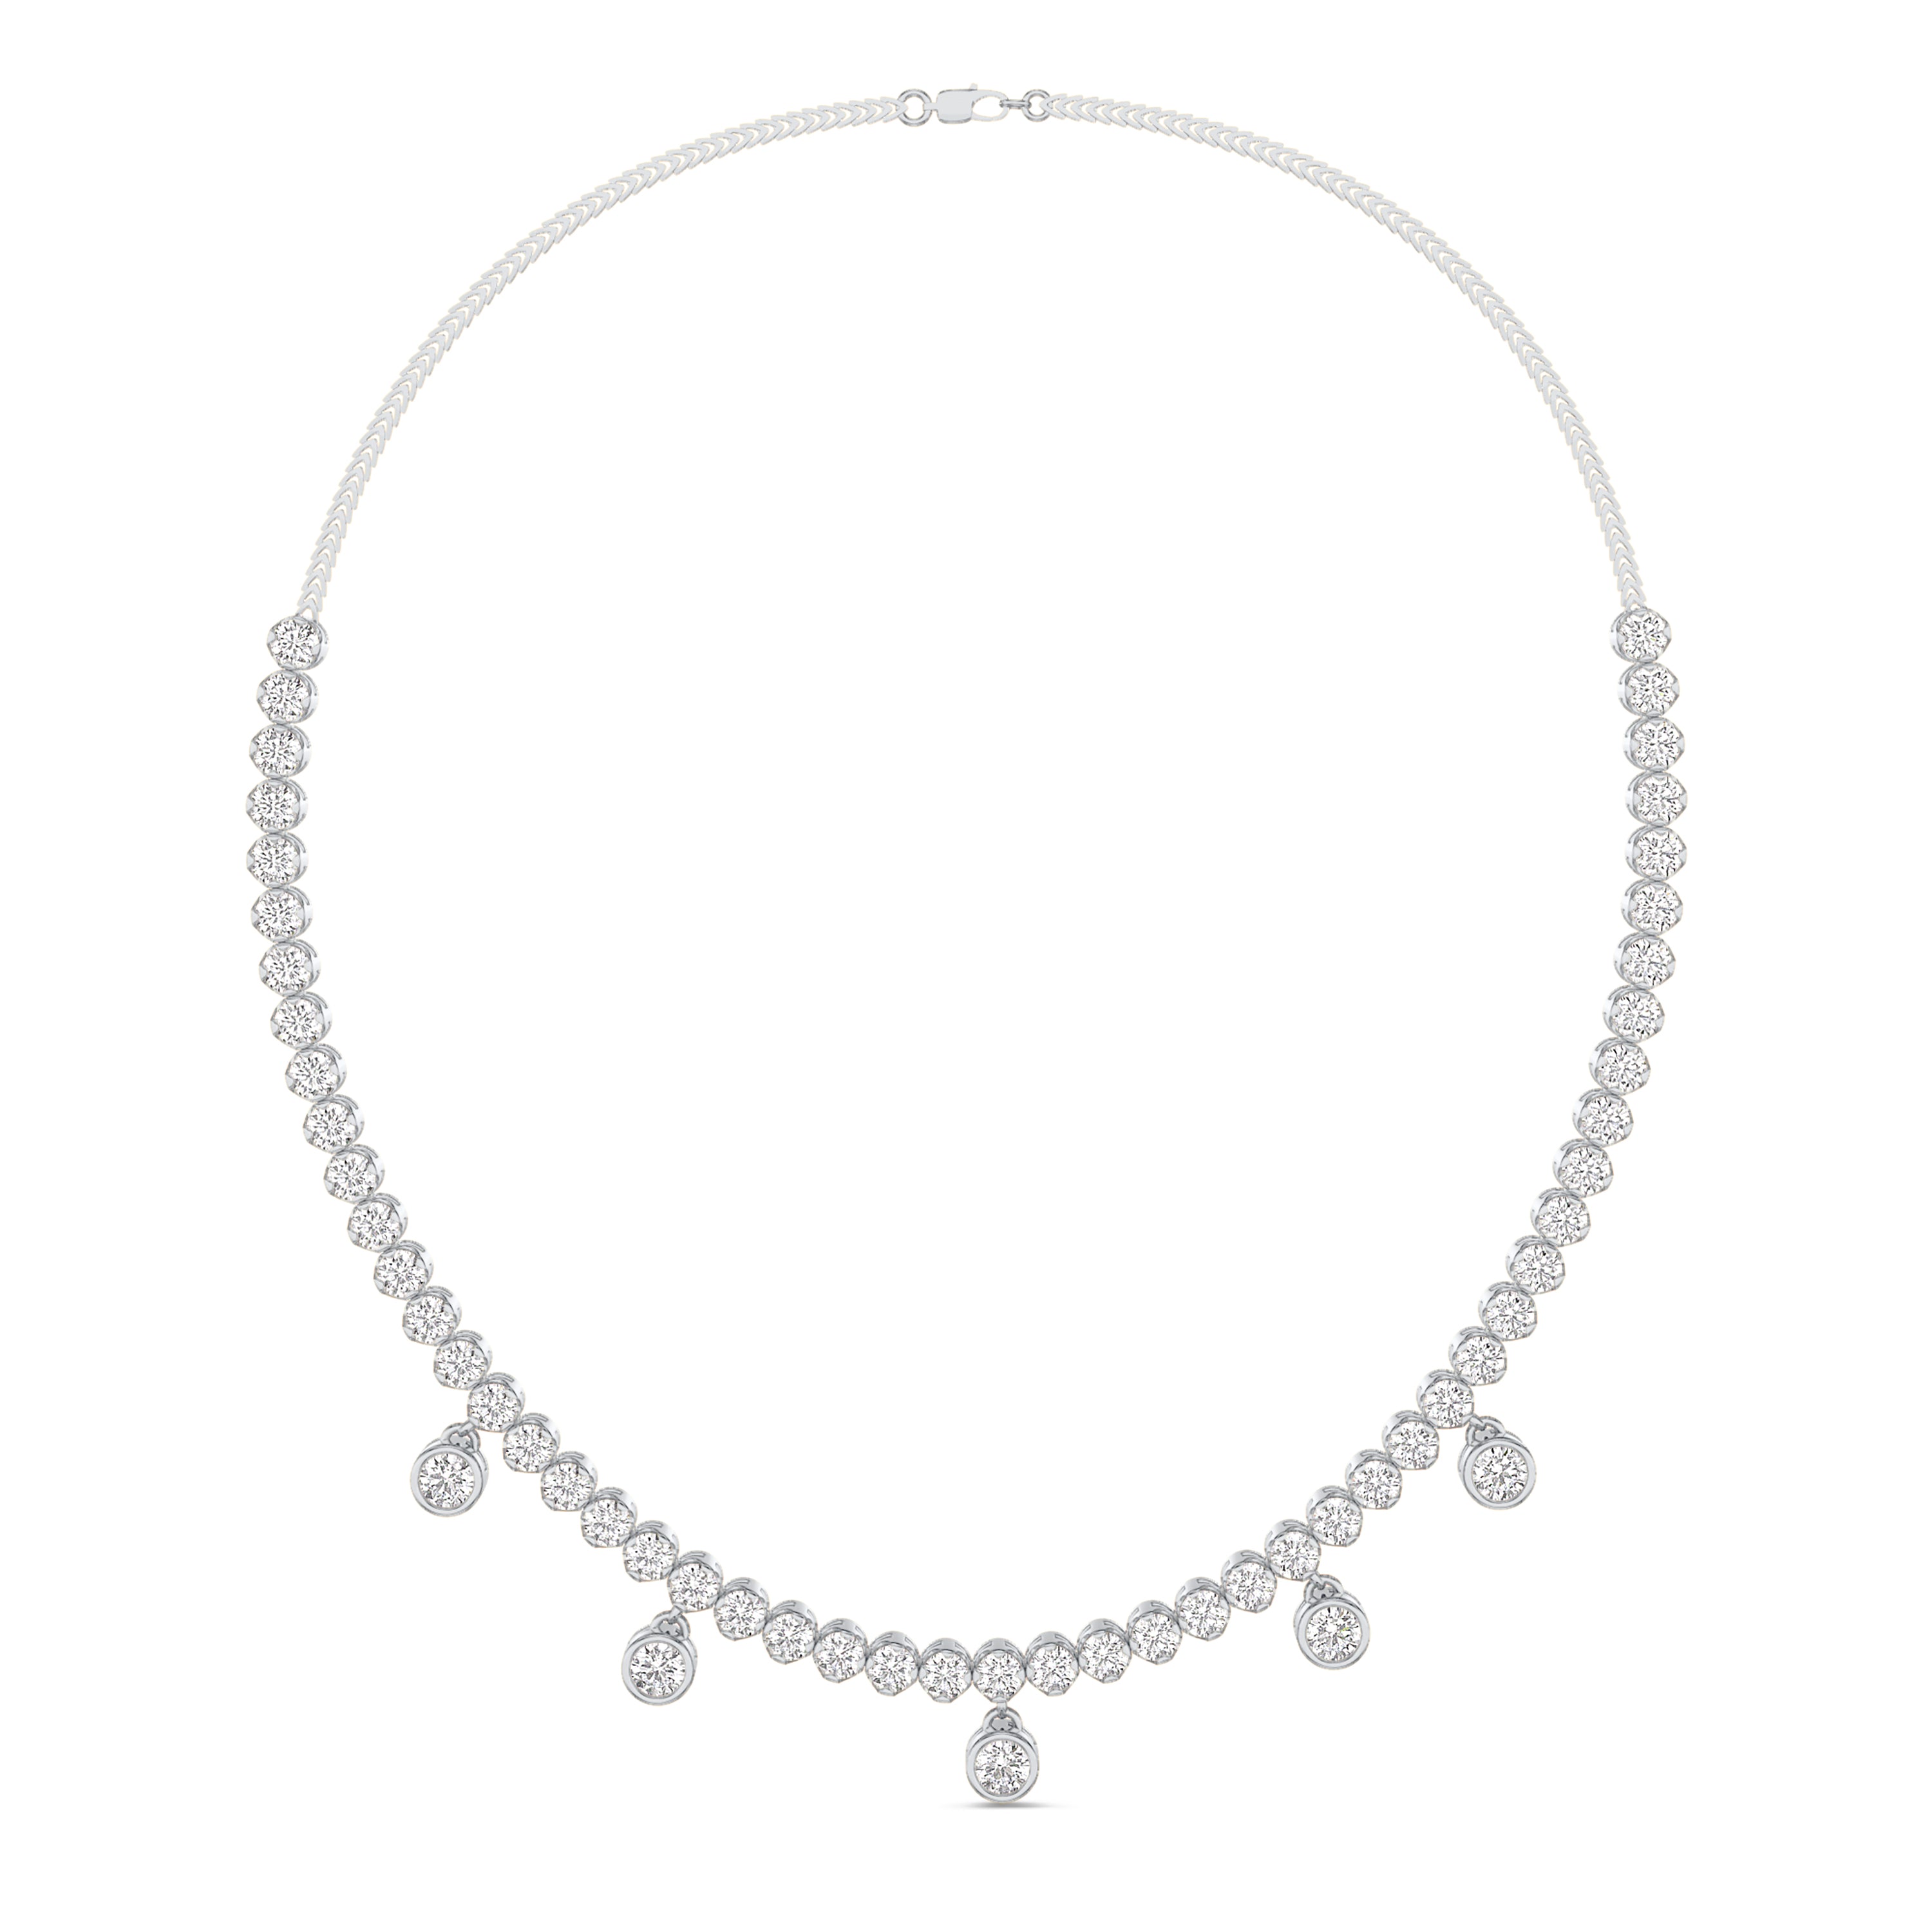 Floating diamond necklace in 18k gold, 3.25 carat, FG color and SI clarity #gold_white